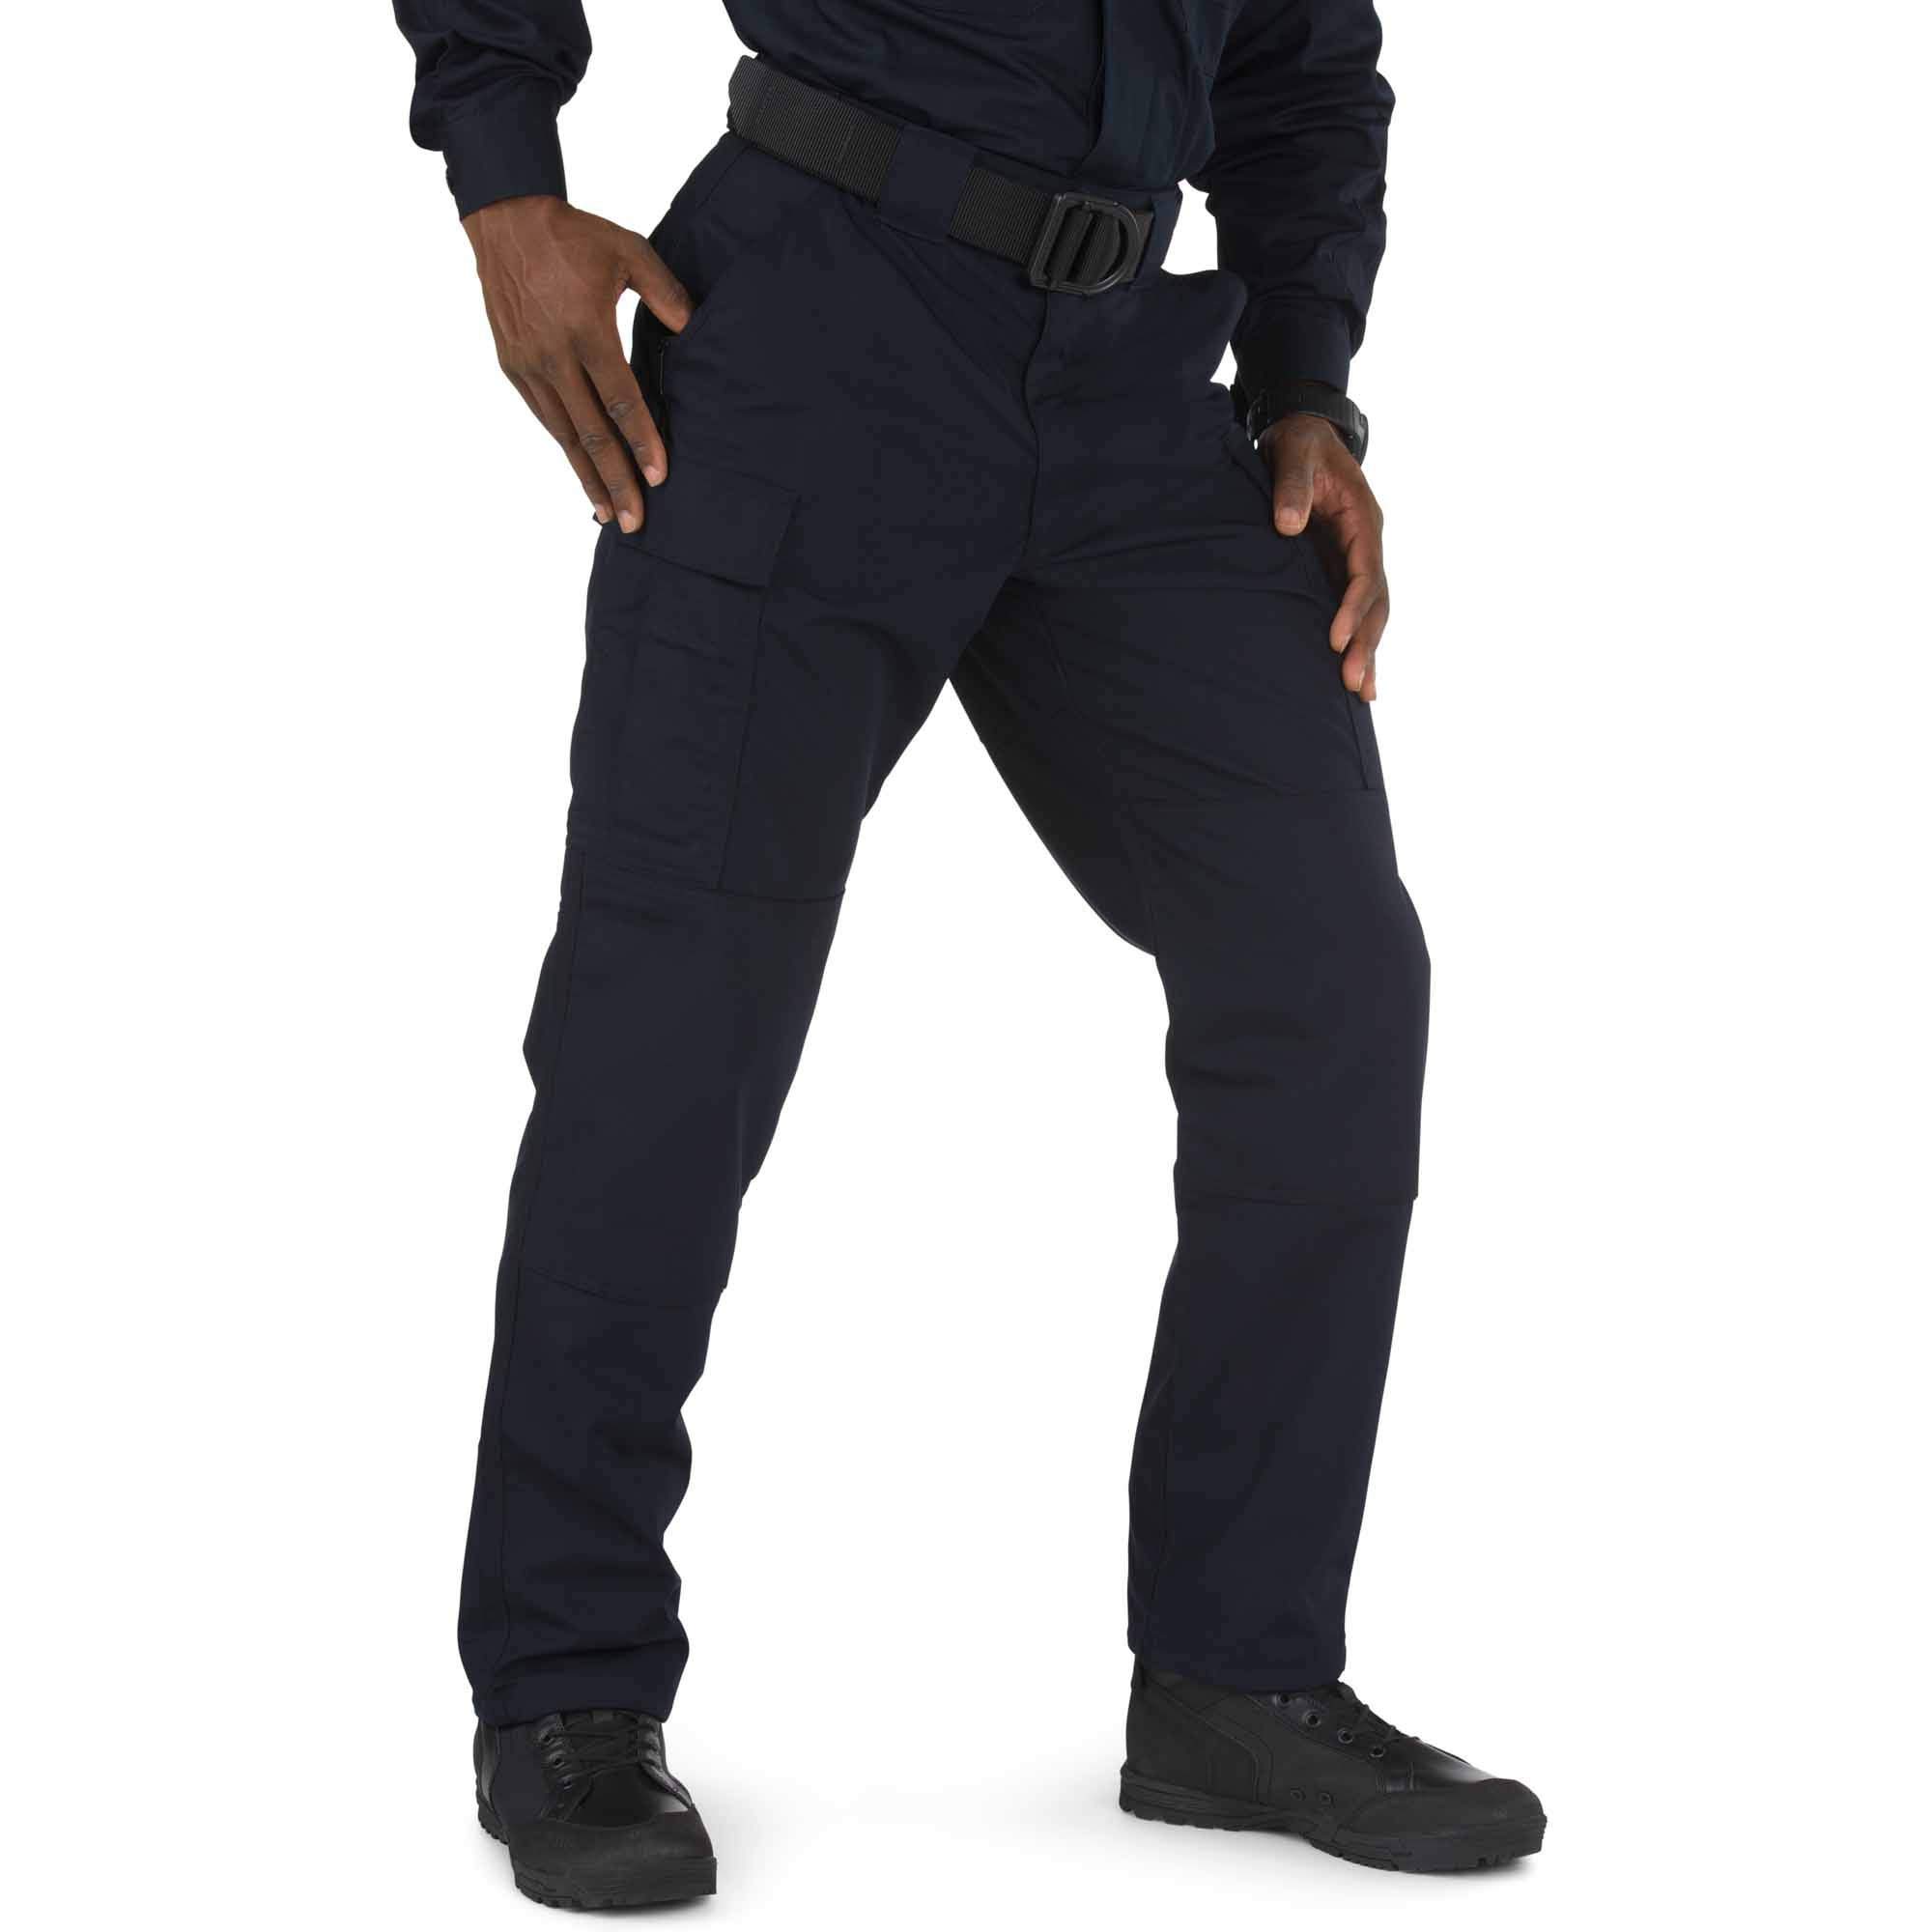 5.11 Tactical Men's Taclite TDU Professional Work Pants, Polyester-Cotton Fabric, Style 74280